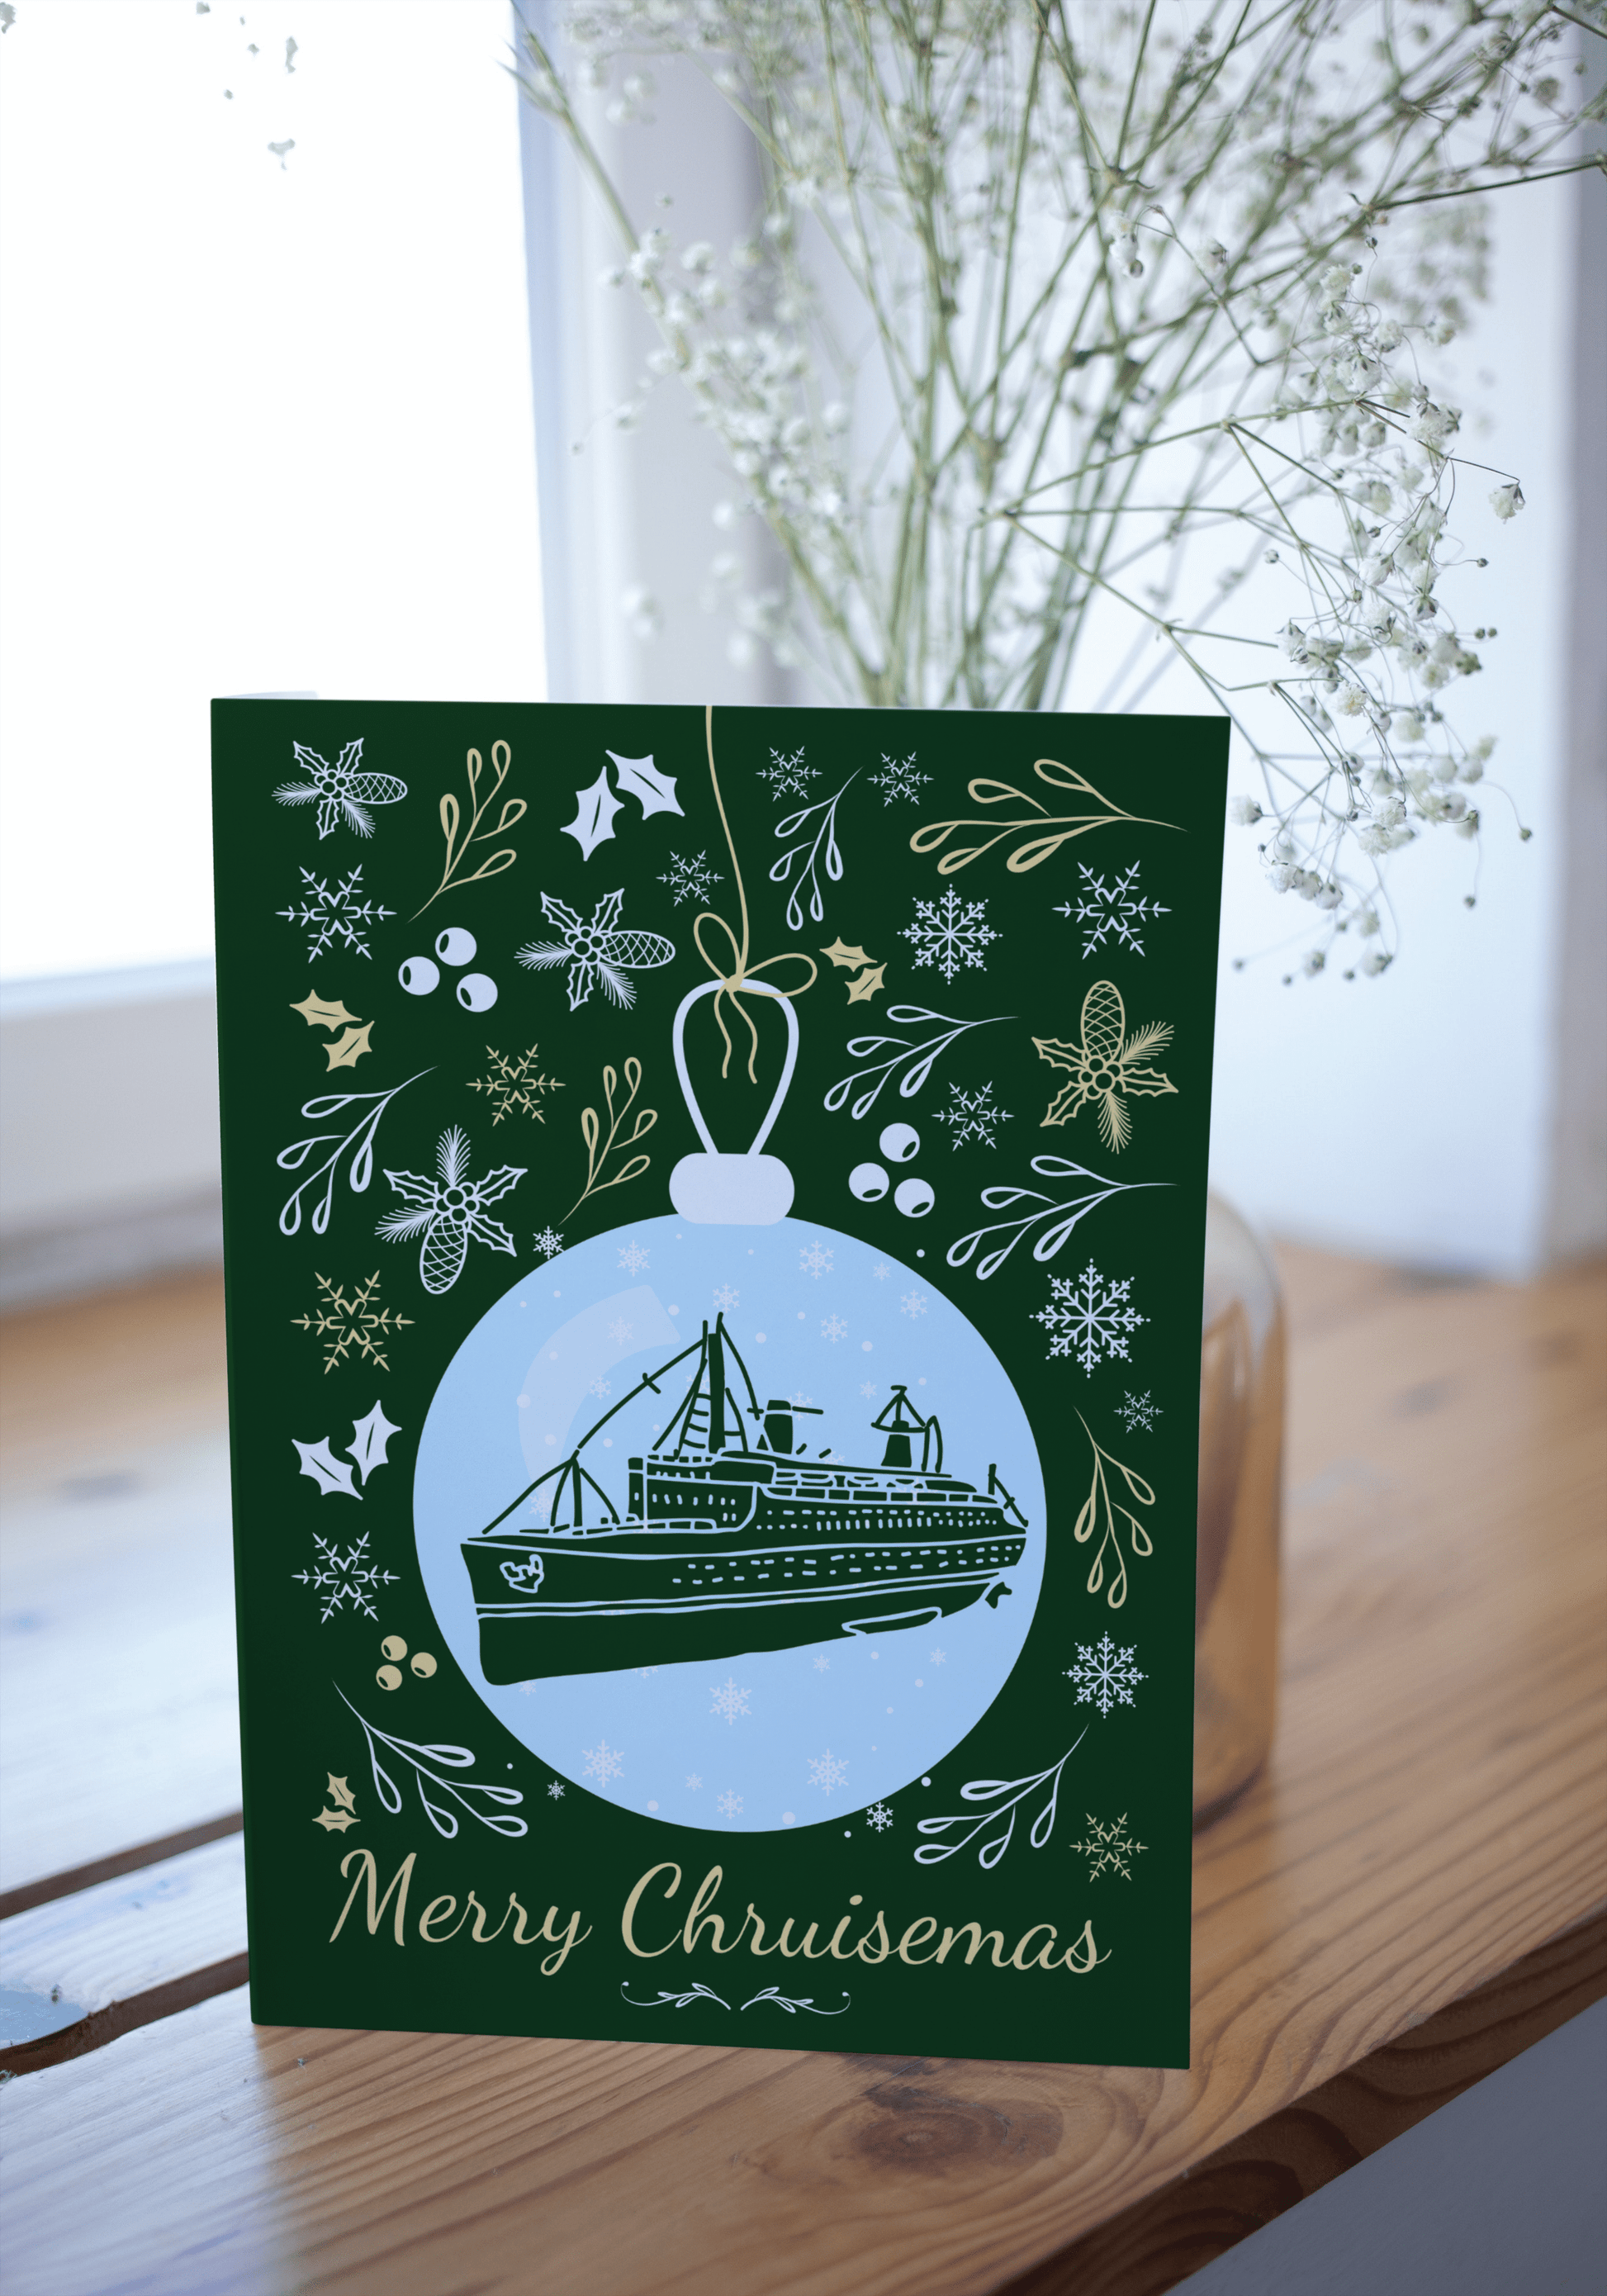 Nautical Christmas card (Merry Cruise-mas) Great Harbour Gifts